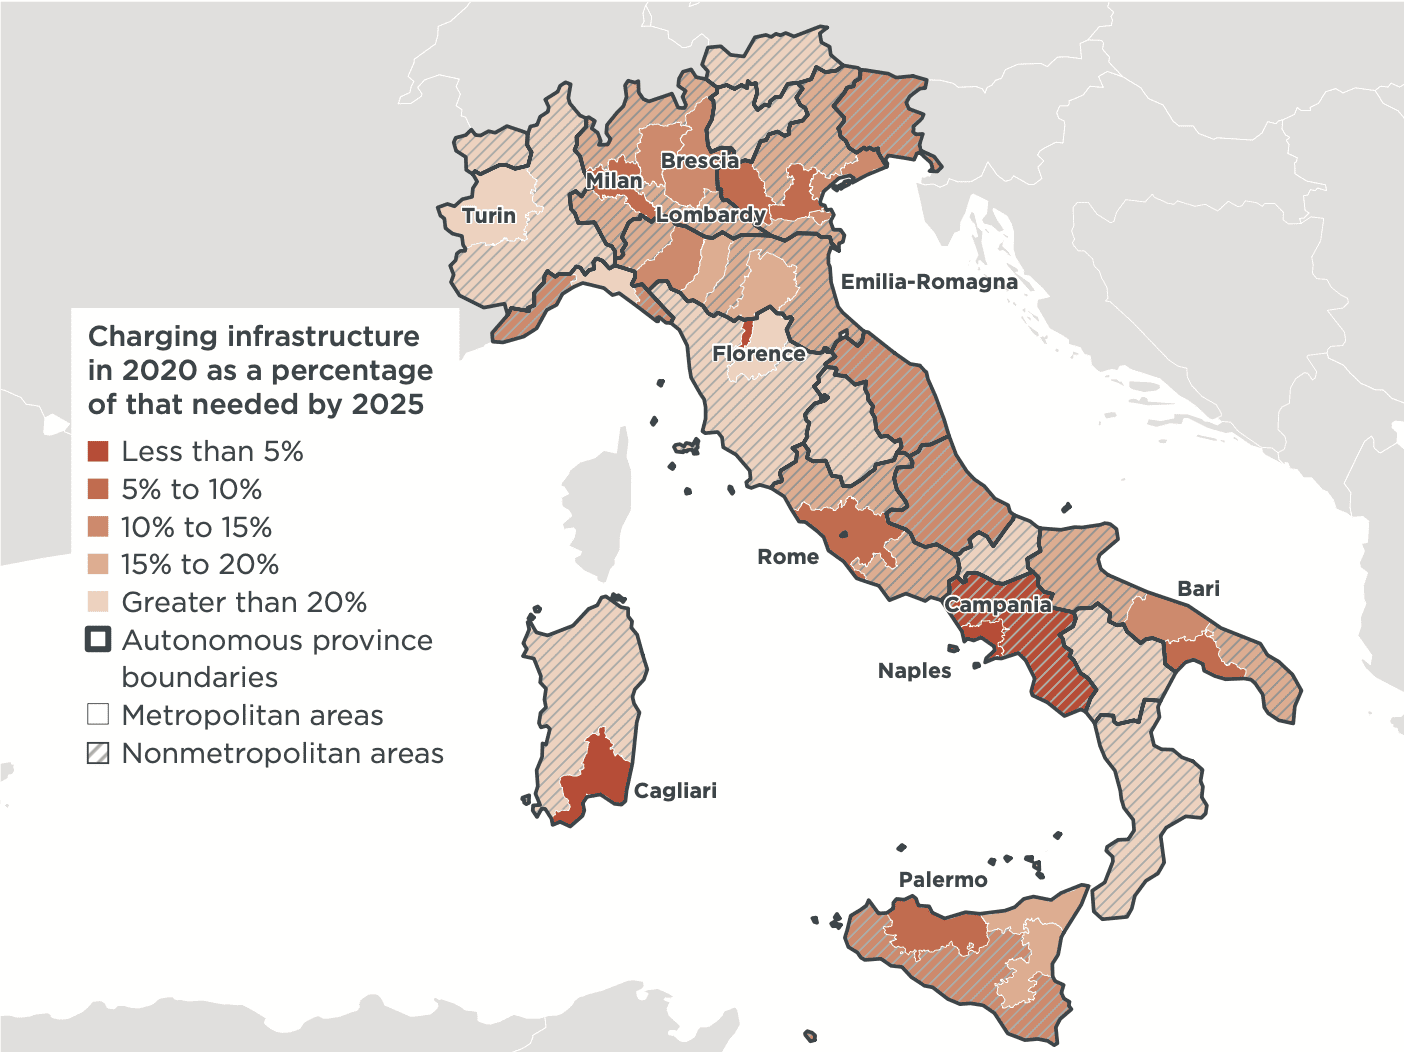 map of Italy showing charging infrastructure